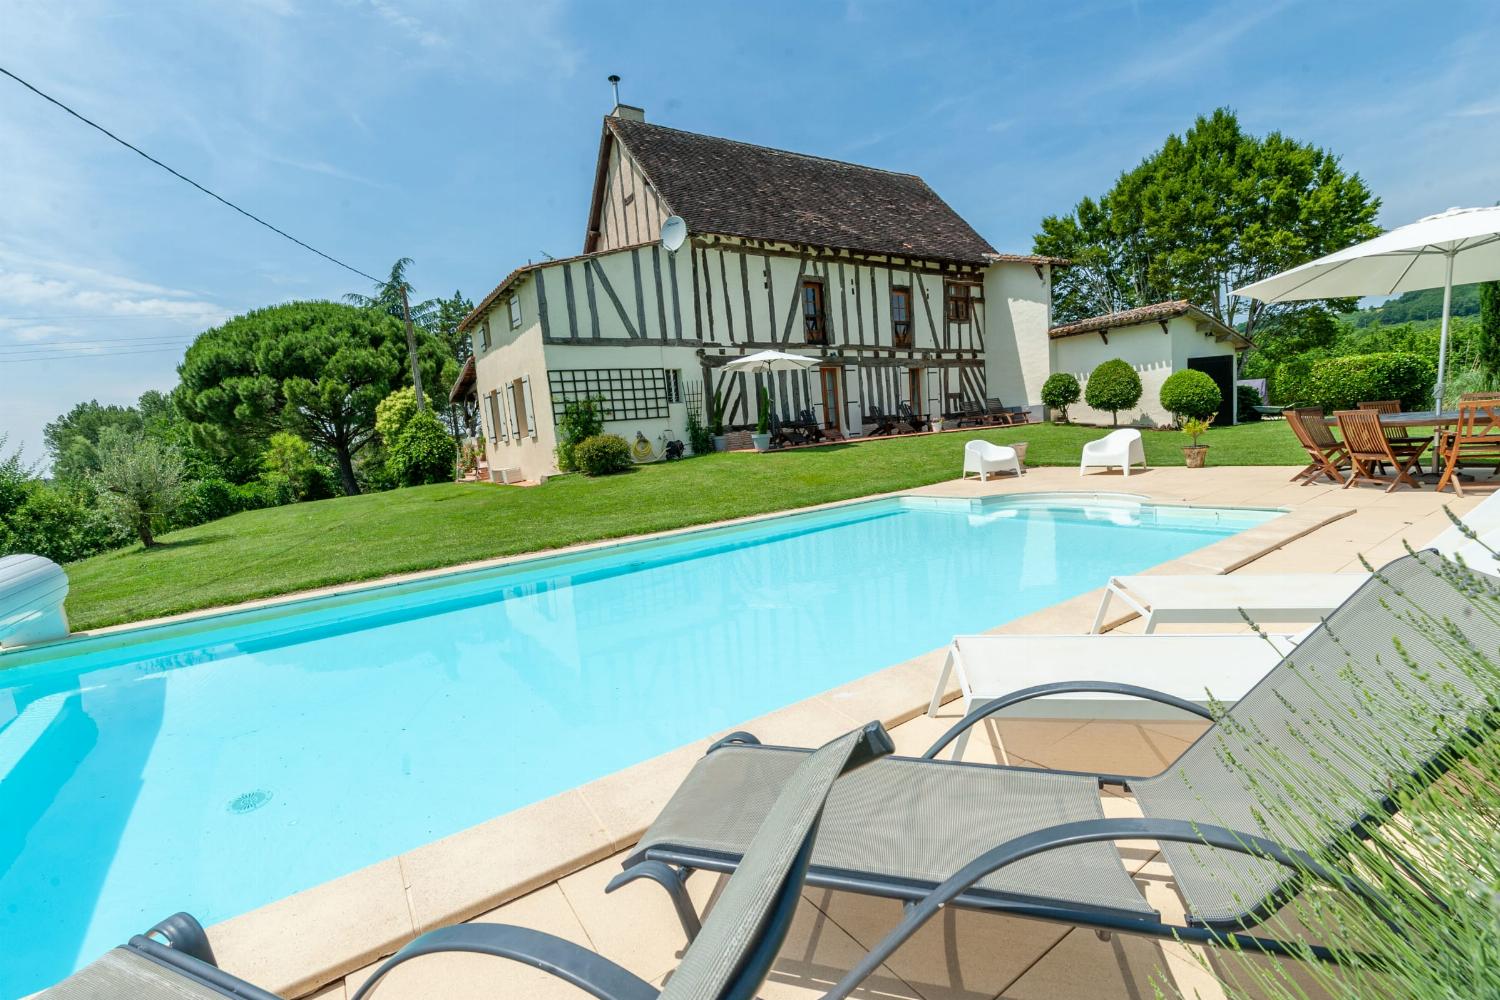 Rental home in Lot-et-Garonne with private heated pool